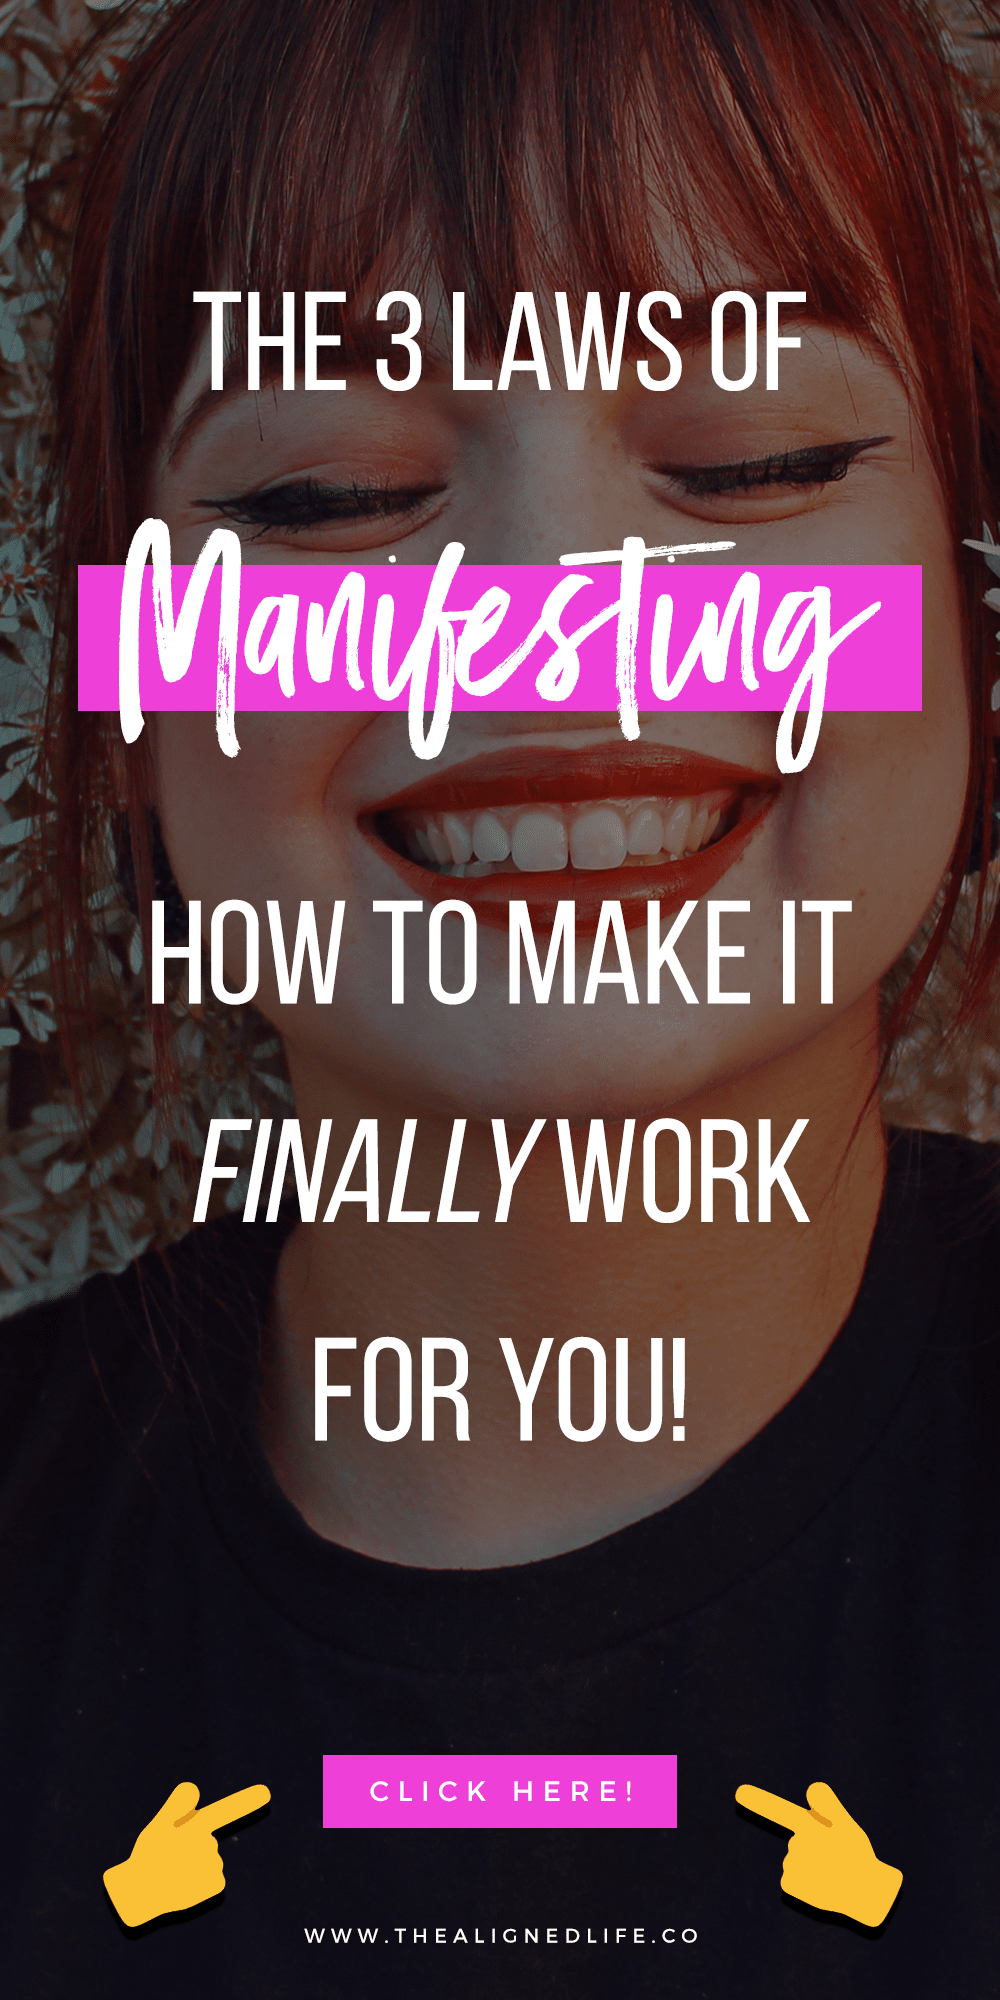 The 3 Laws Of Manifesting - How You Can Finally Make It Work For You!